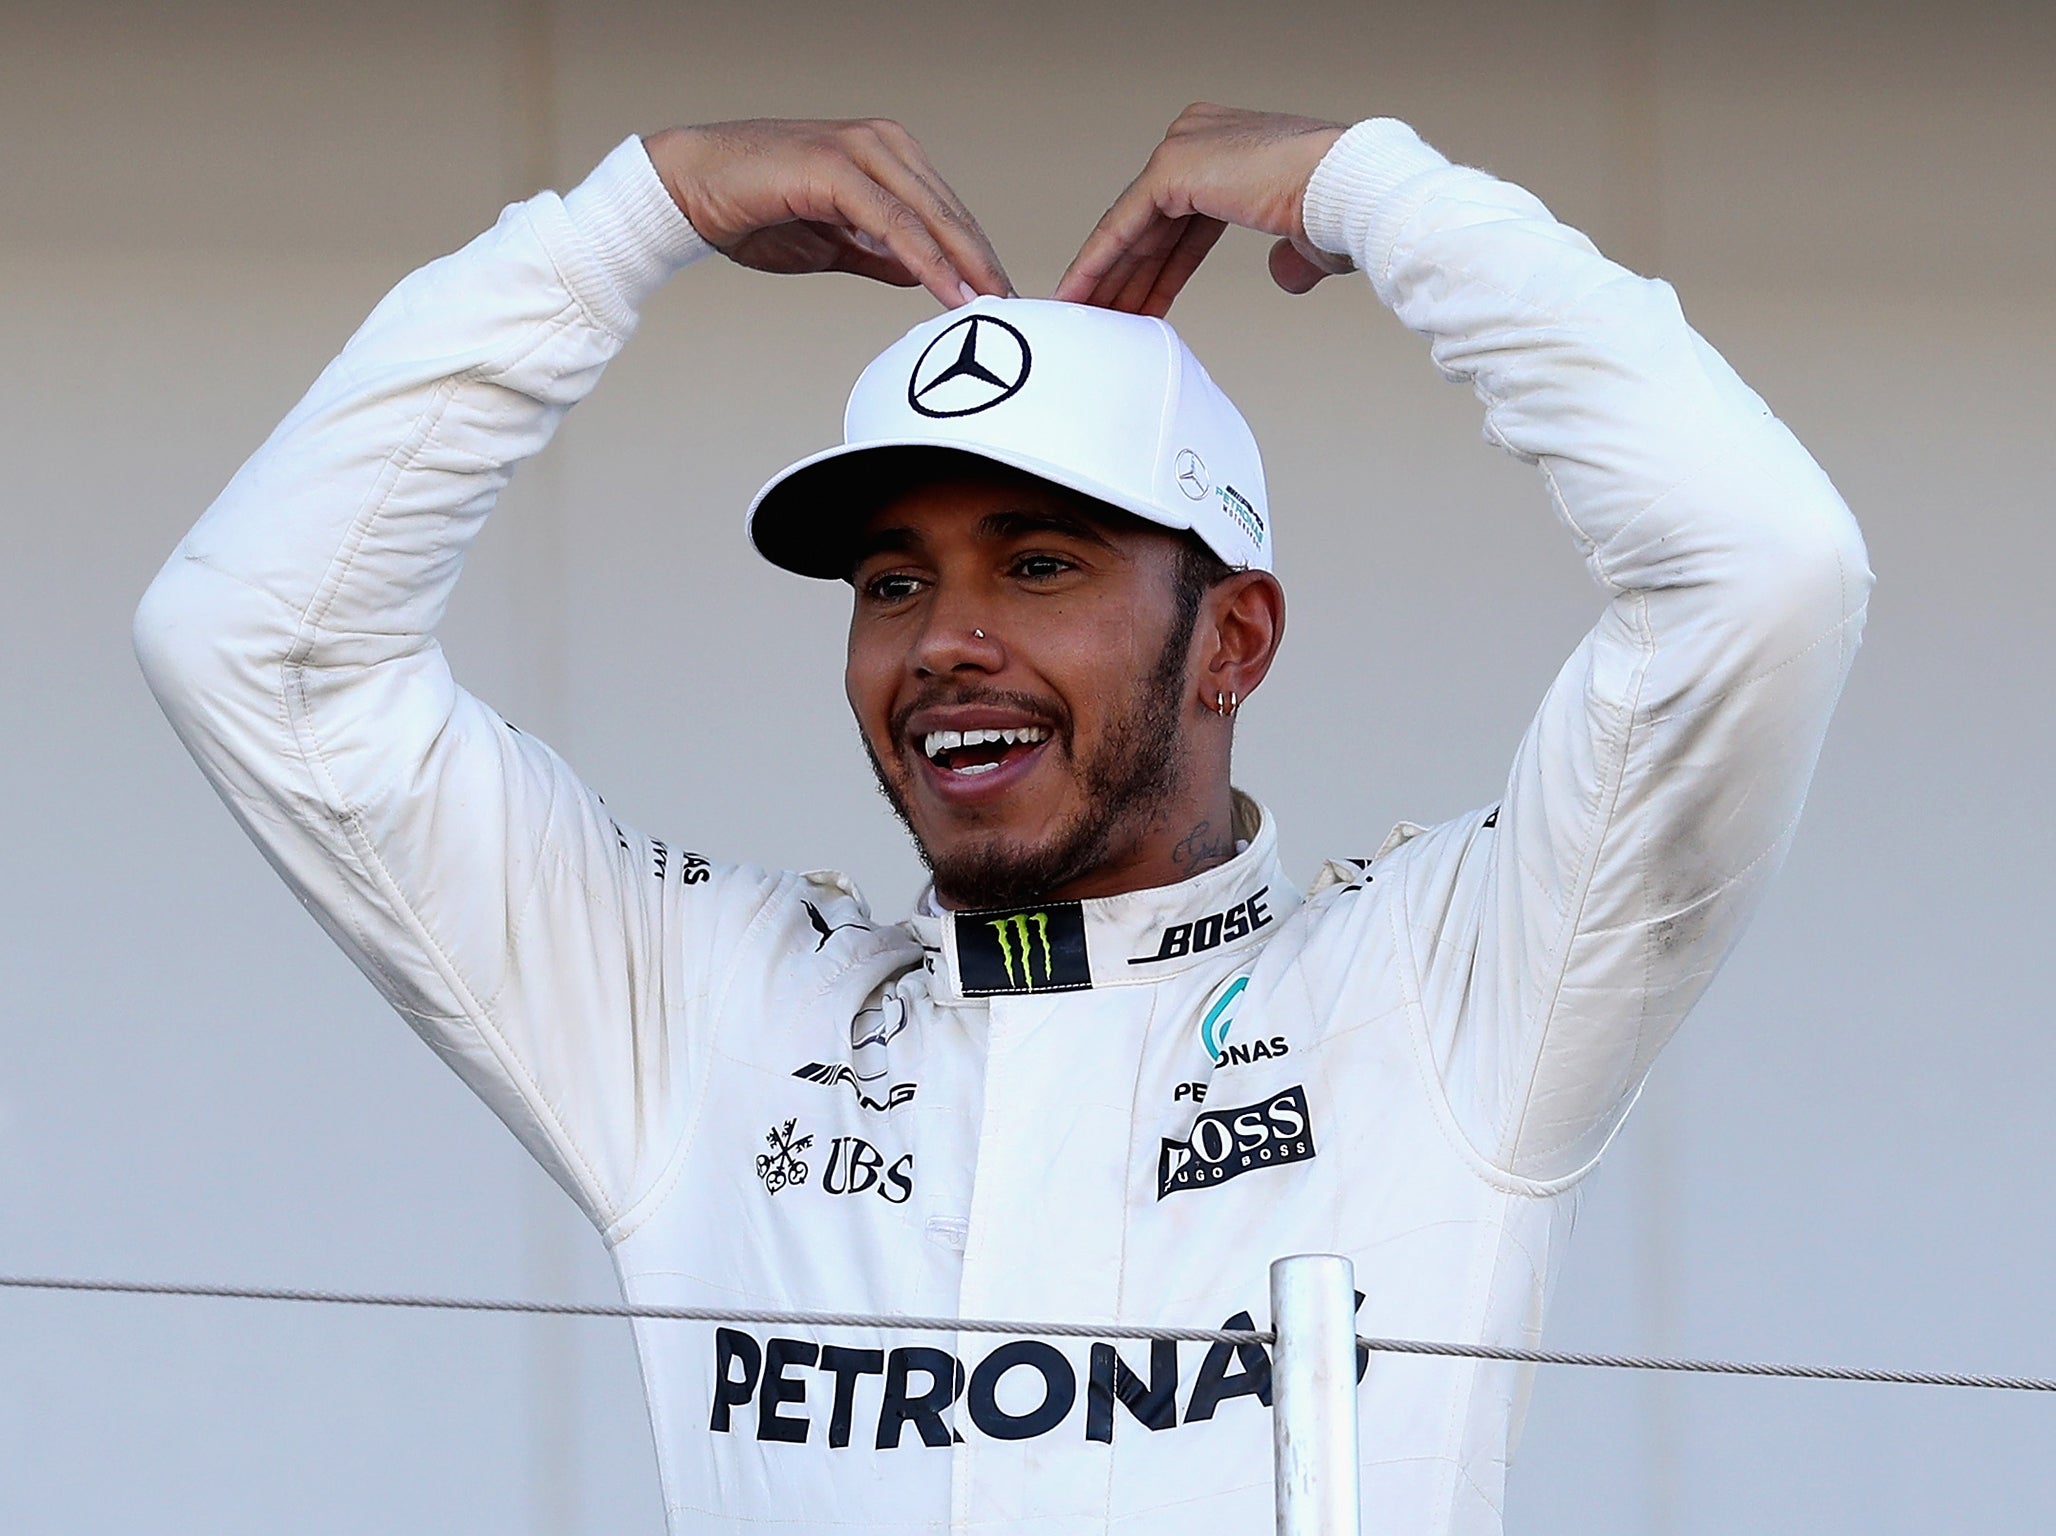 Hamilton is now in a strong position in the World Championship standings